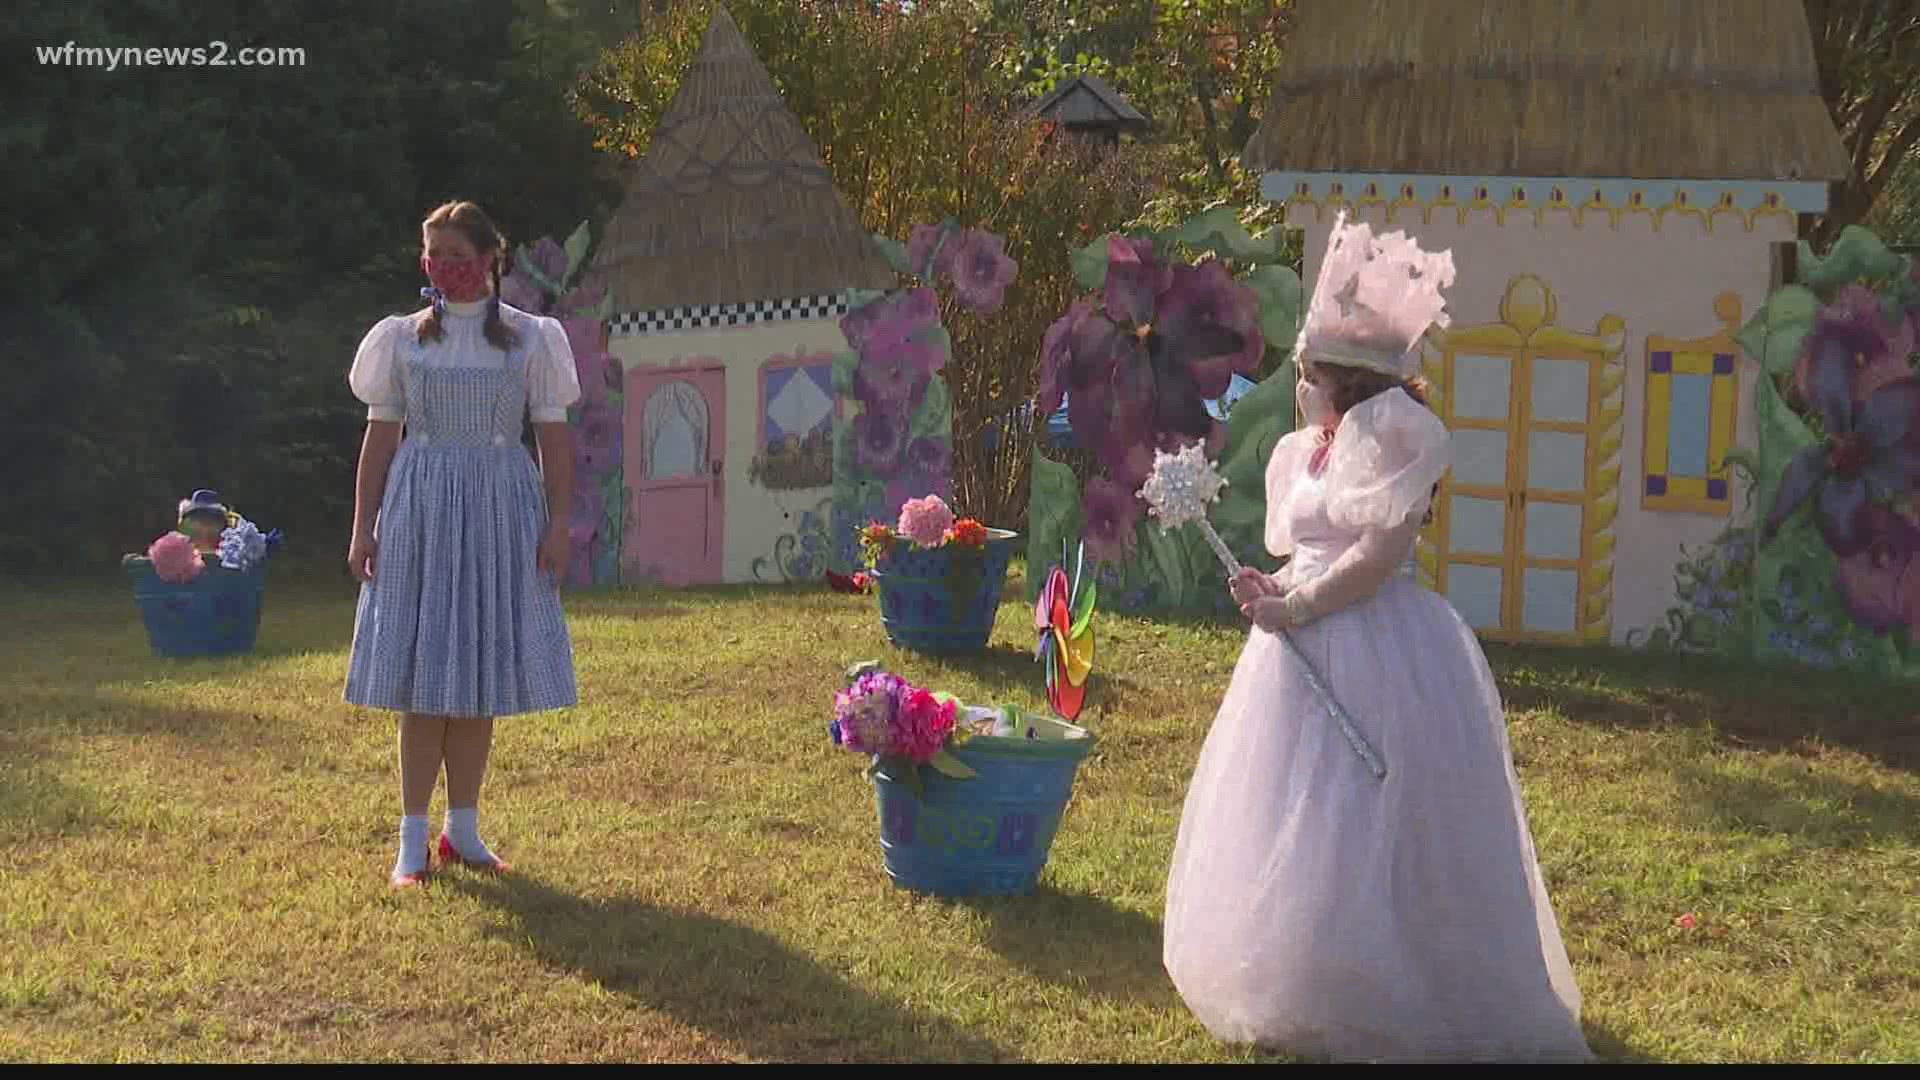 The Community Theater of Greensboro is putting on a “Wizard of Oz” showing. The performance will be staged outside on a local farm trail.